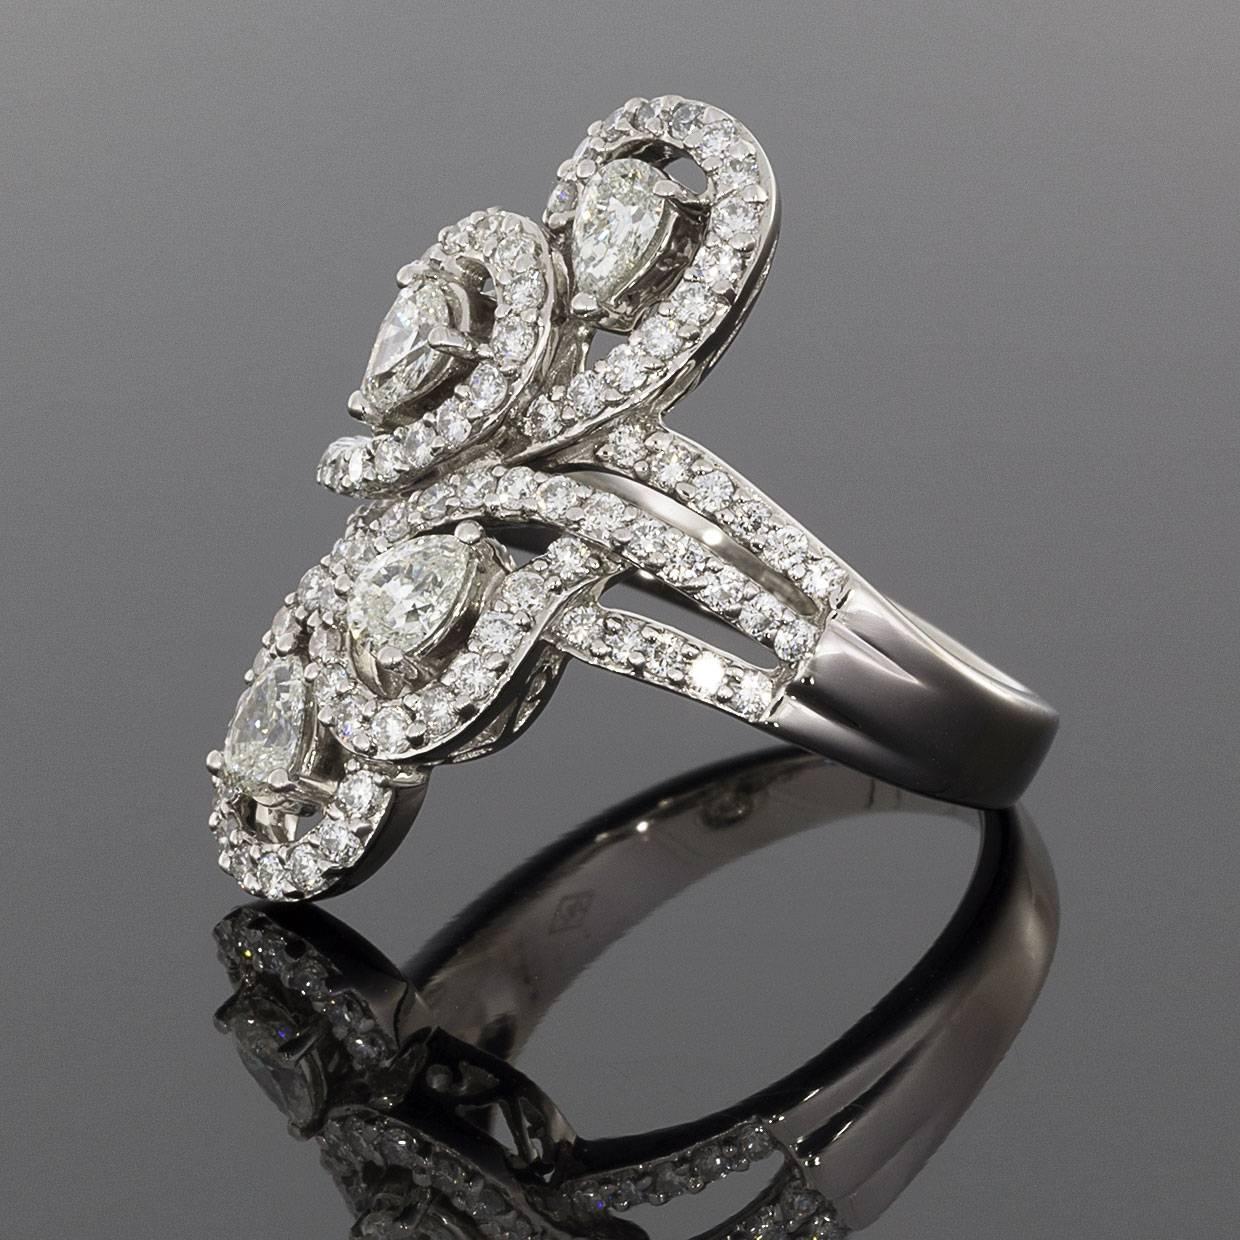 This gorgeous diamond fashion ring is sure to catch your eye from every angle! It features a 4 pear shaped diamonds surrounded by paisley shapes in 18 karat white gold. These scintillating diamonds are prong & pave set & have a combined total weight